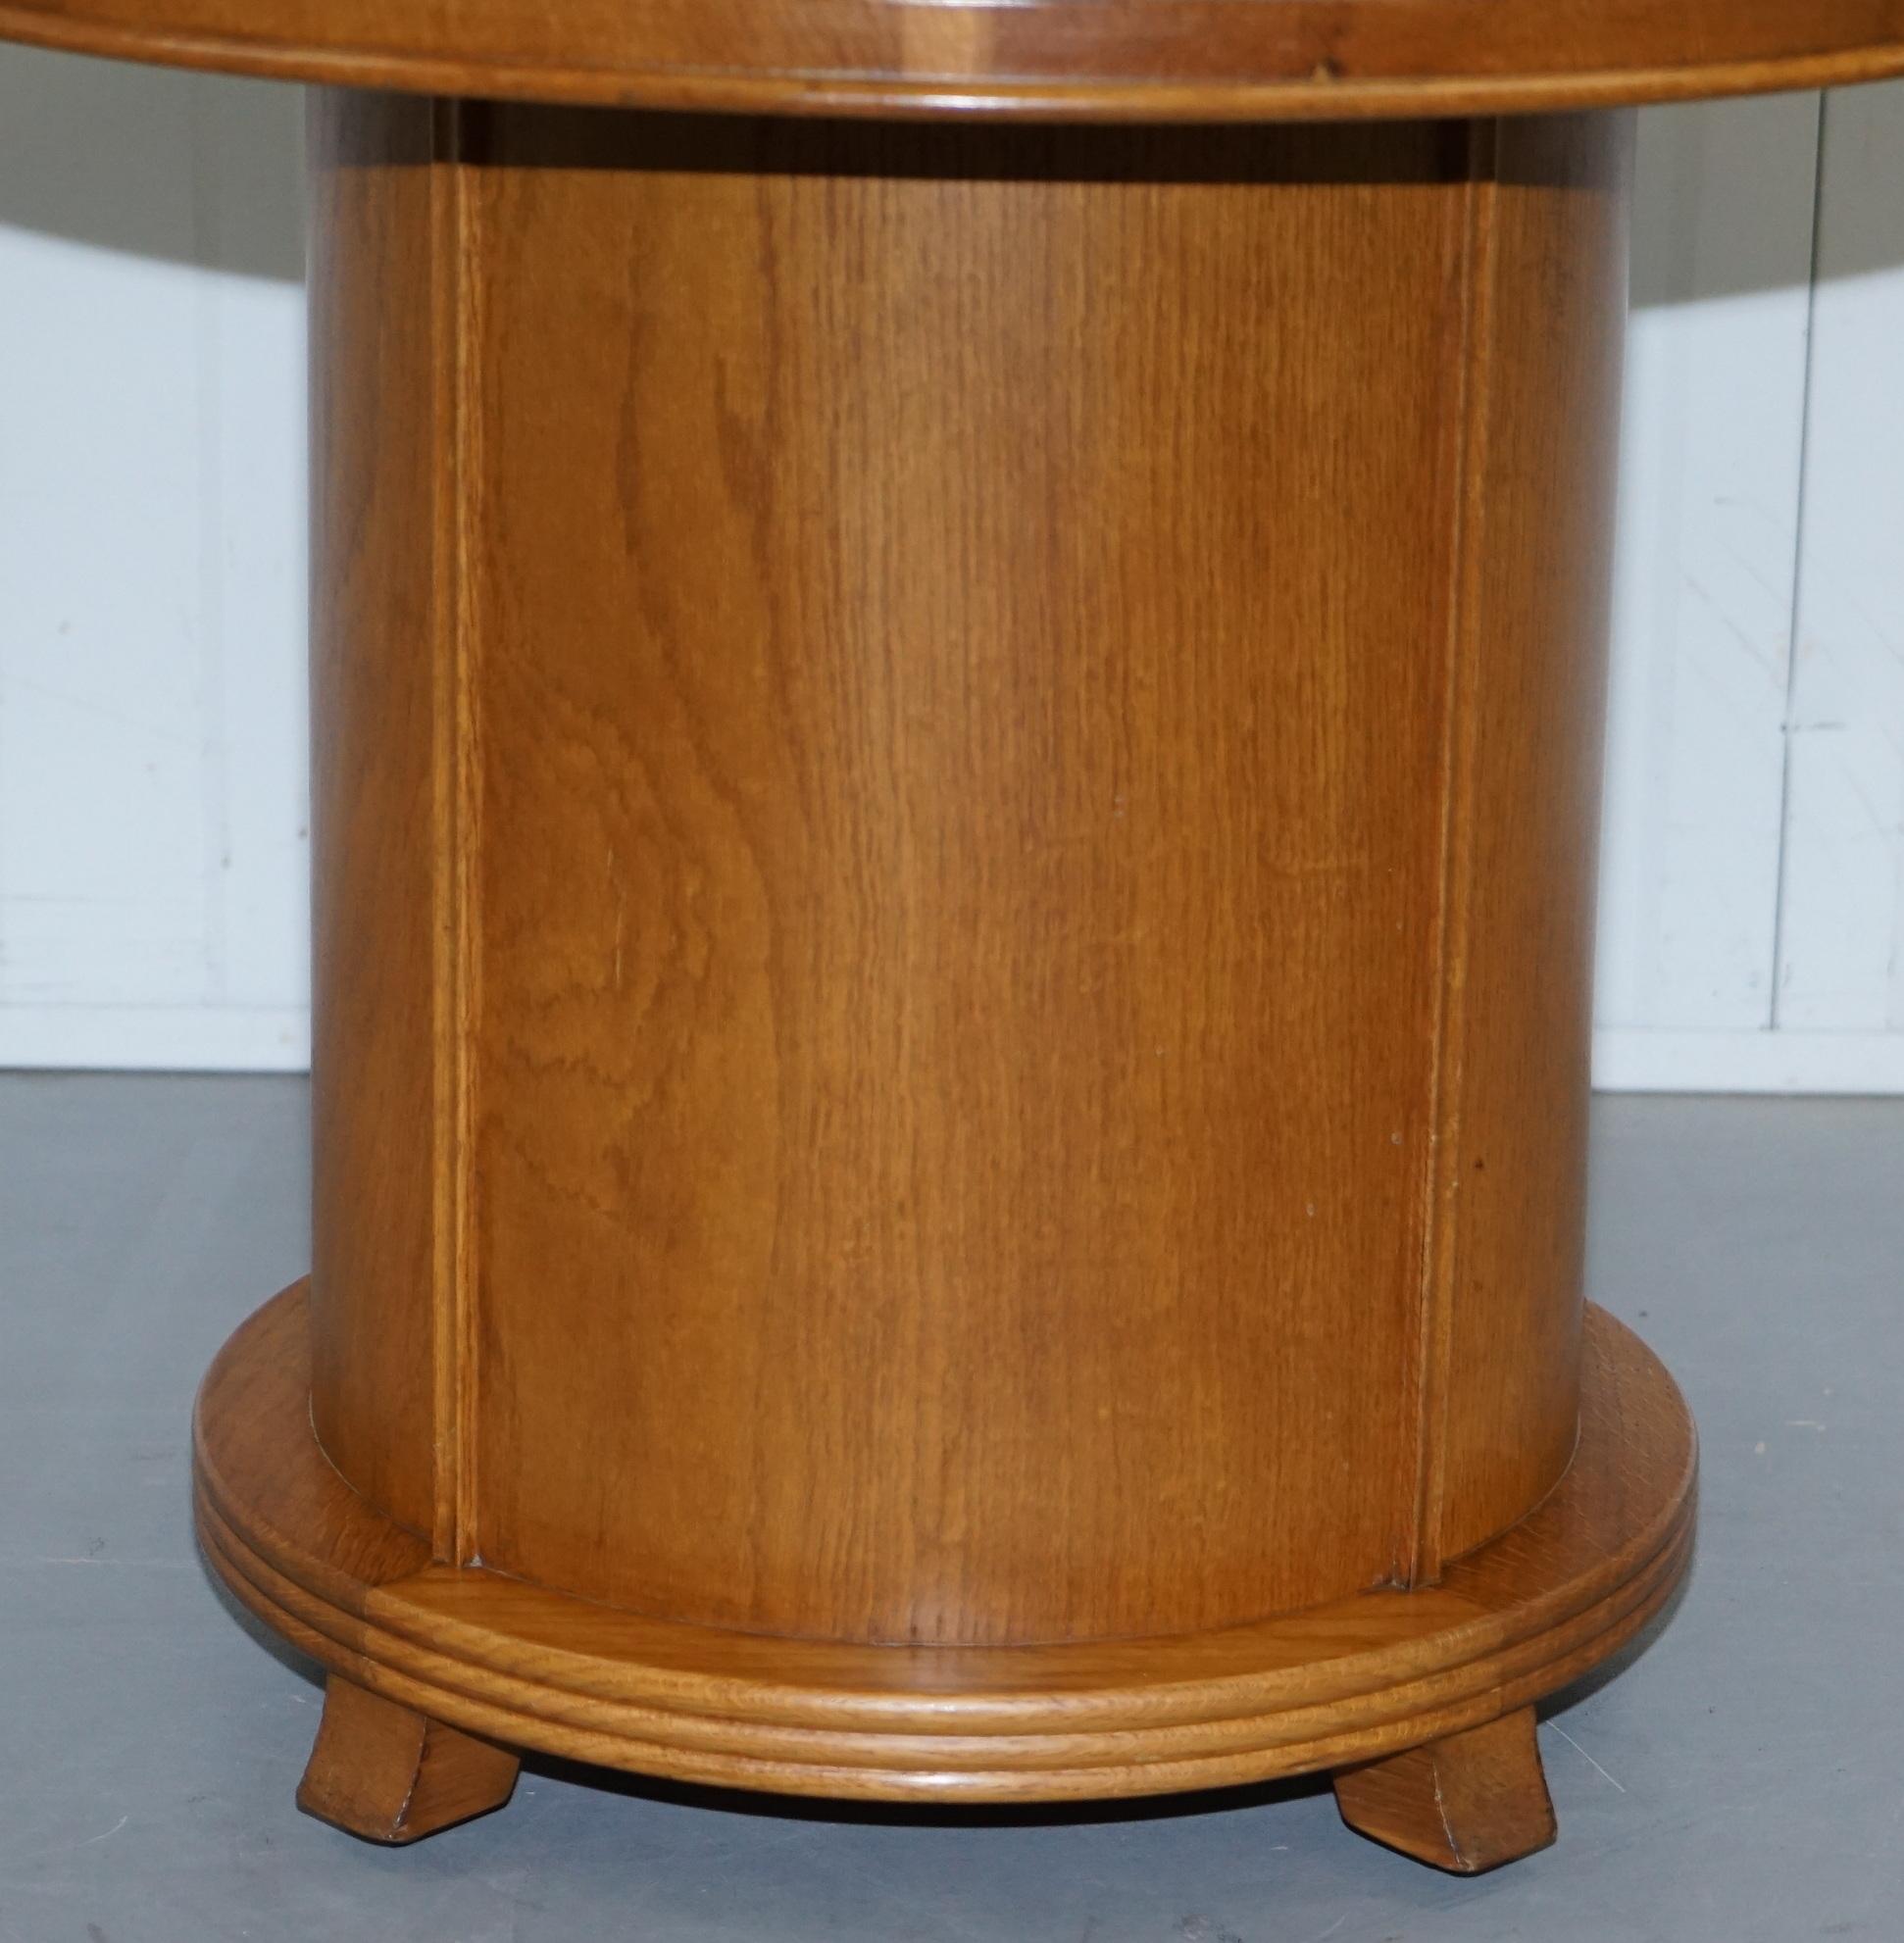 Rare 1930s Walnut Cocktail Table Cabinet with Rising Drinks Decanter Holder 1